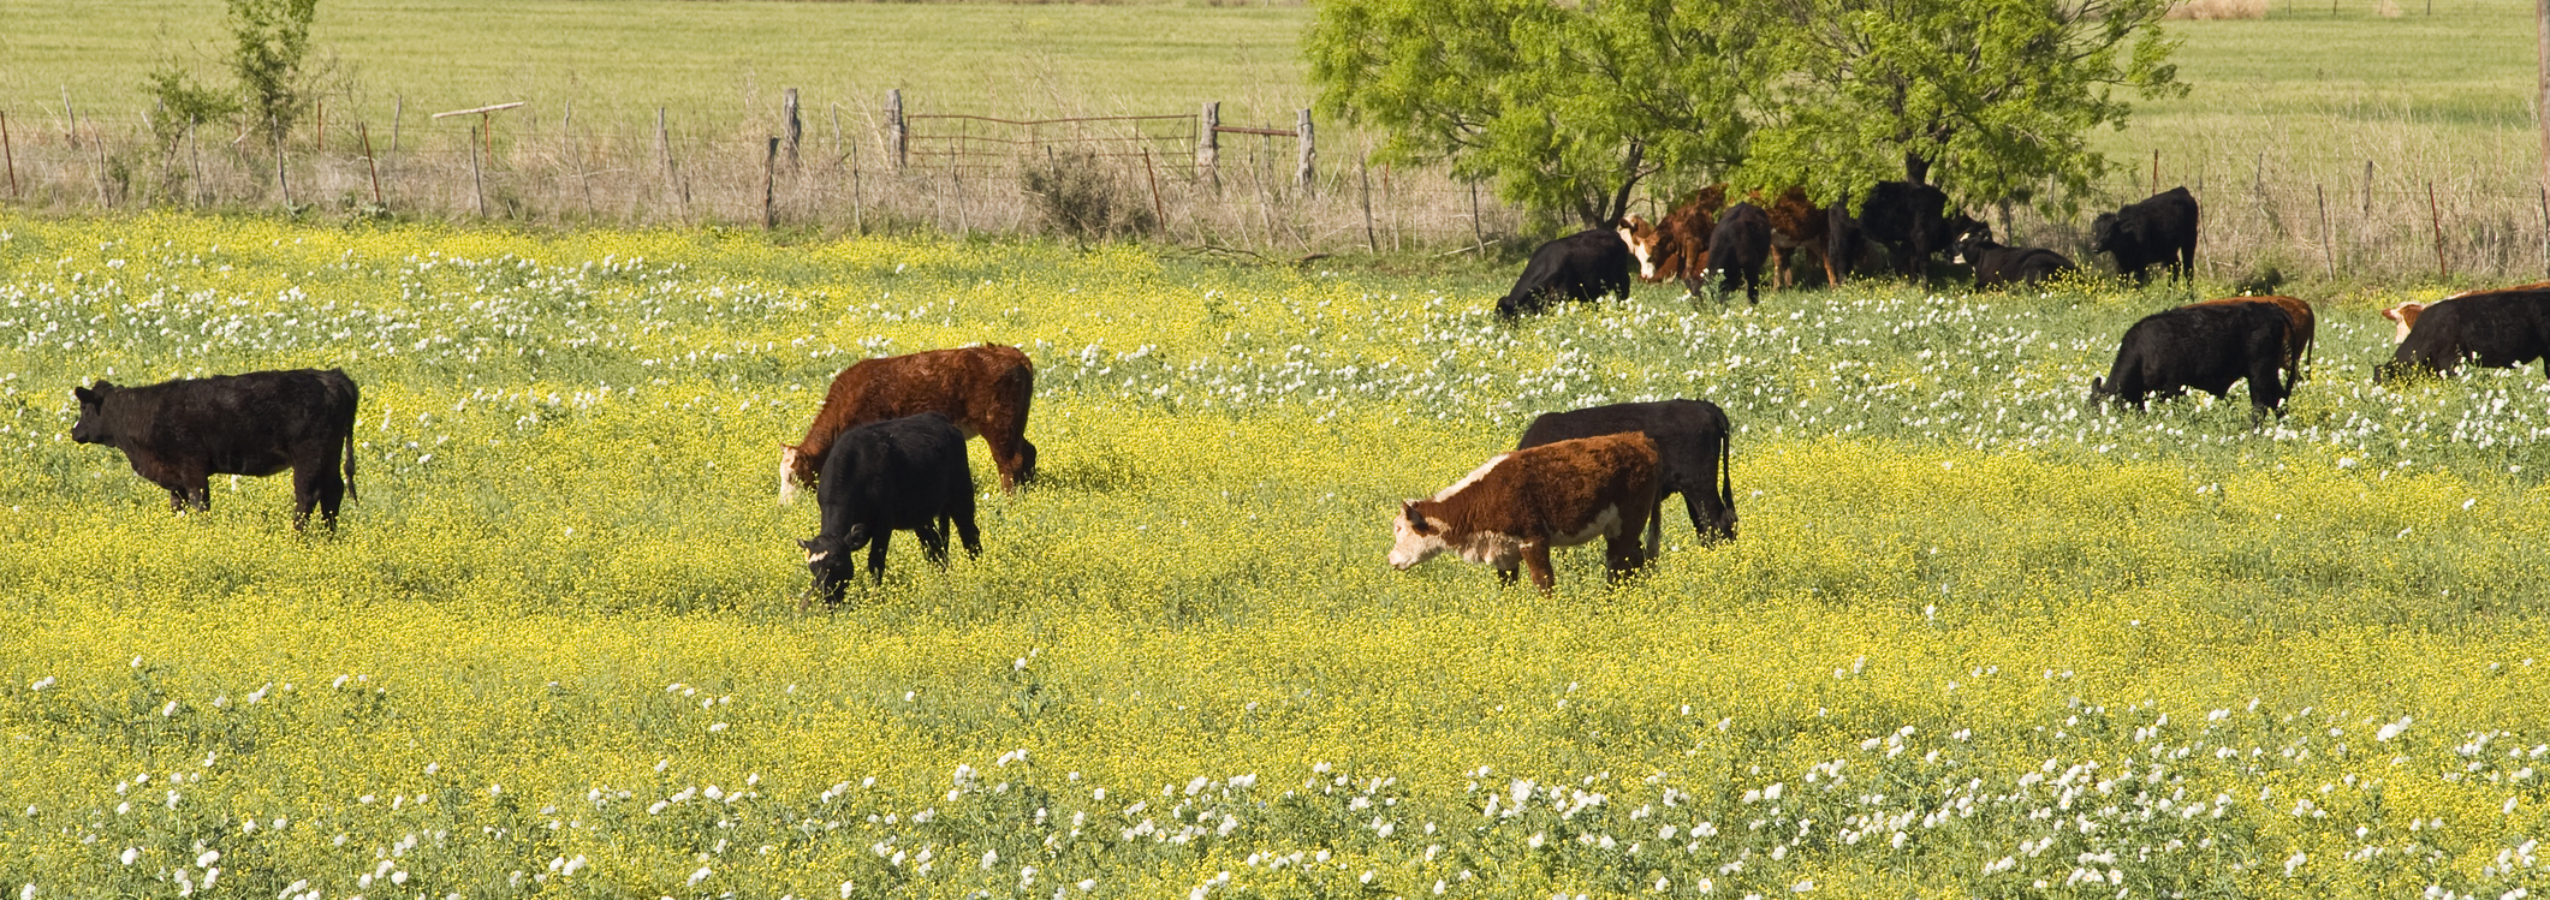 Cows and Wildflowers